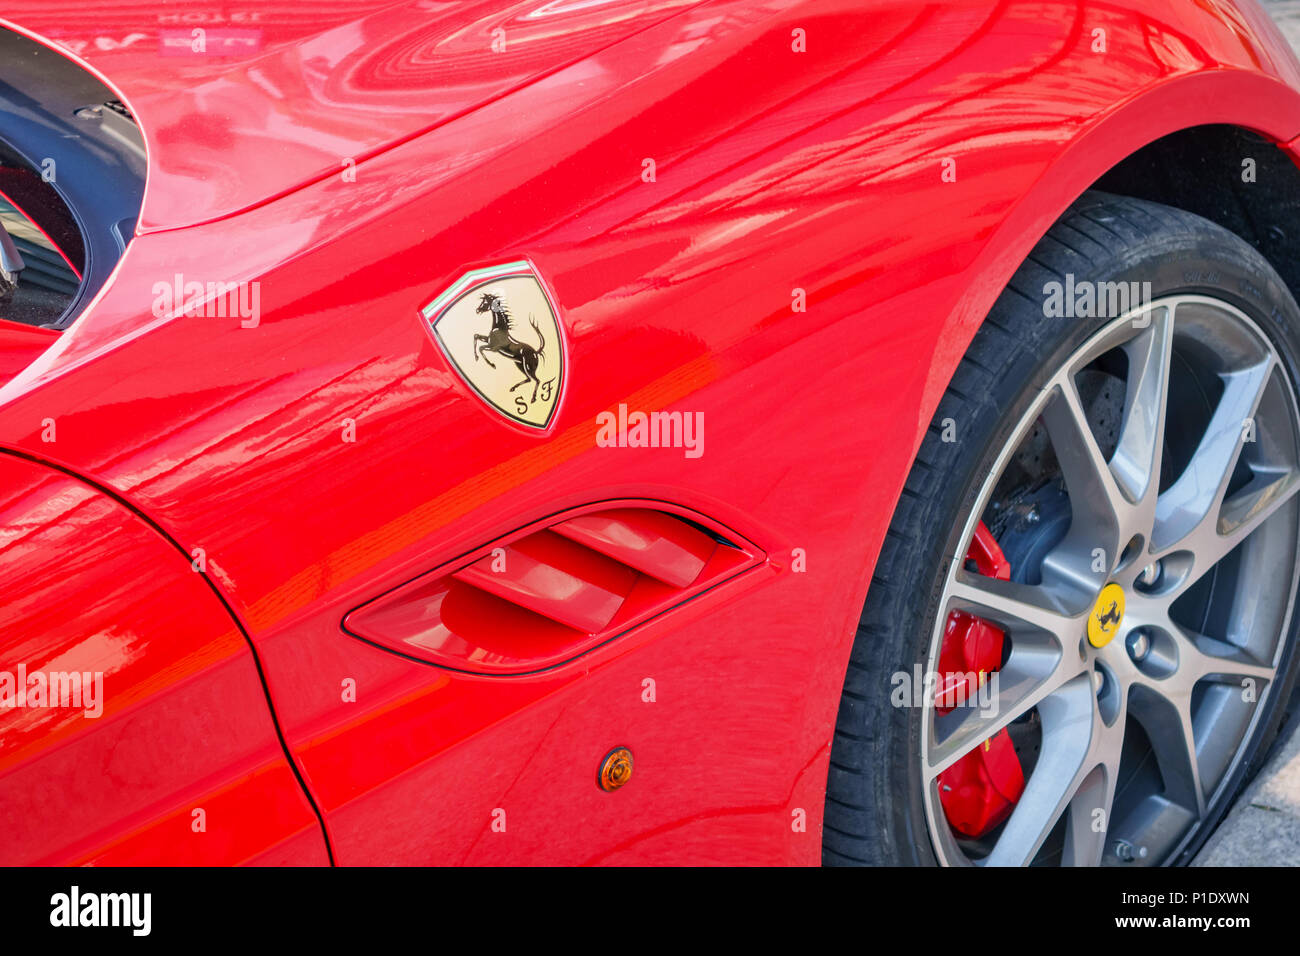 Logo and side of a red Ferrari sports car Stock Photo